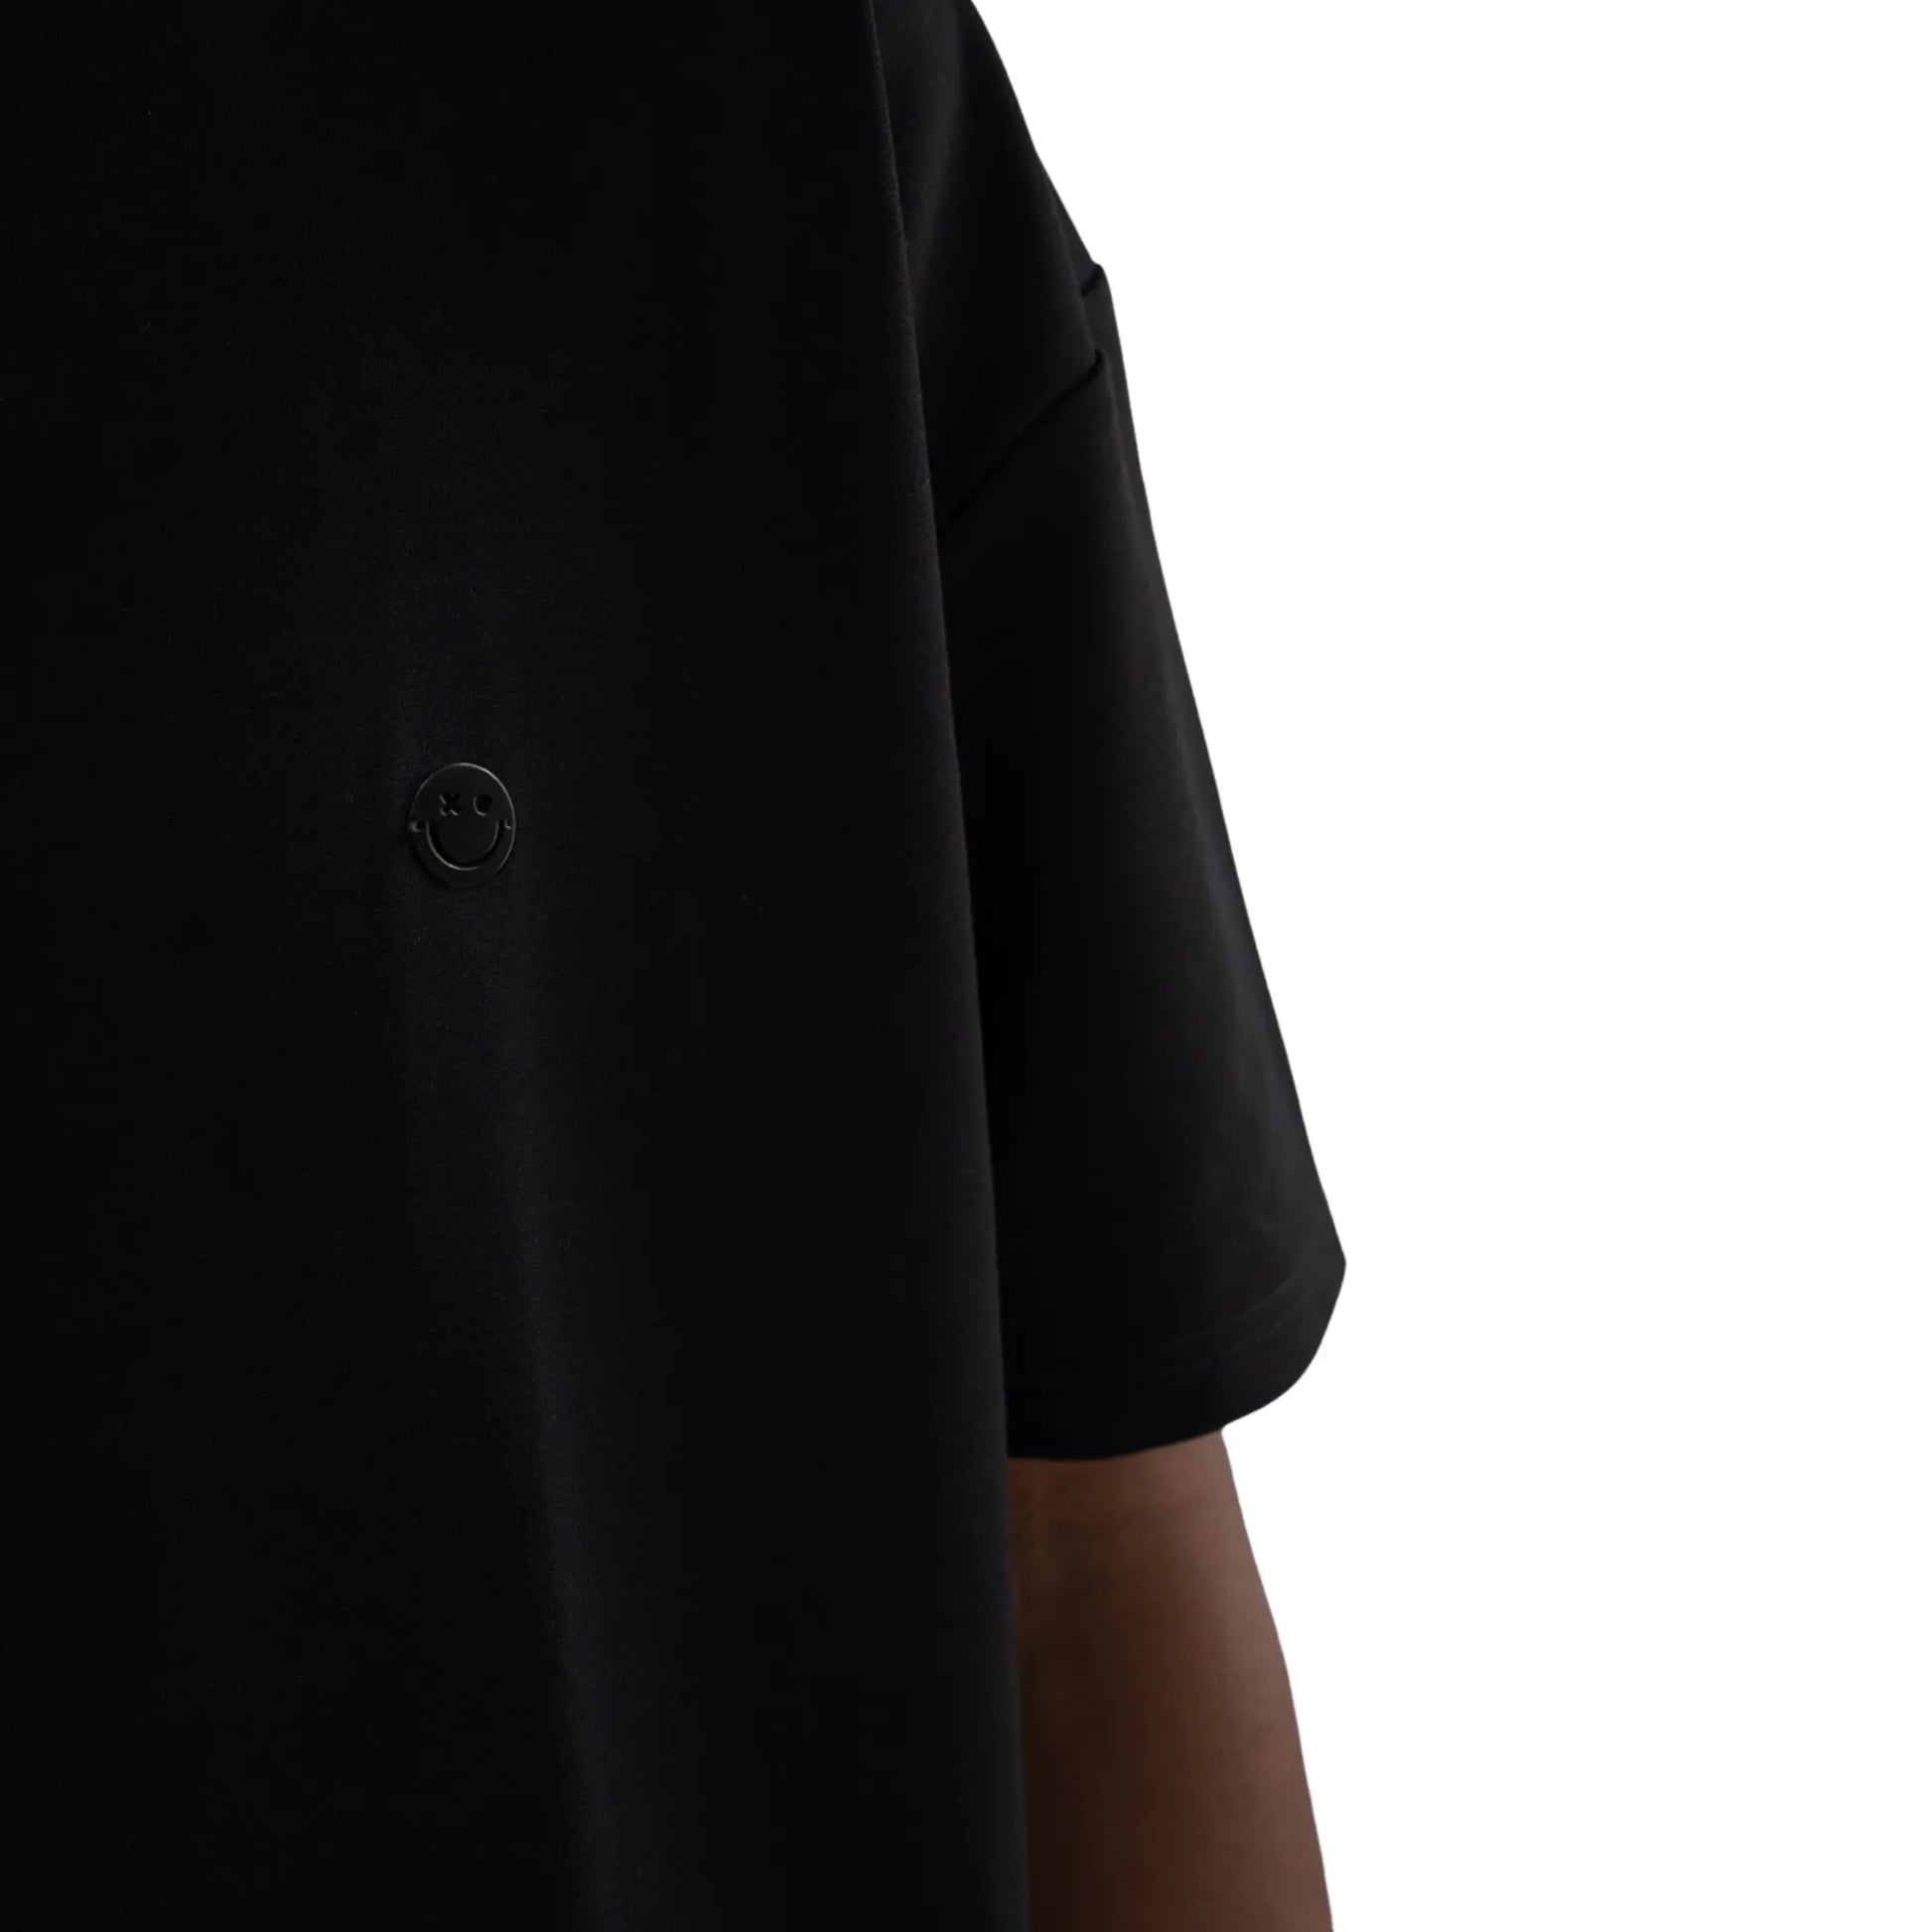 Oversized T-Shirt Black with Black Smiley close-up on smiley logo